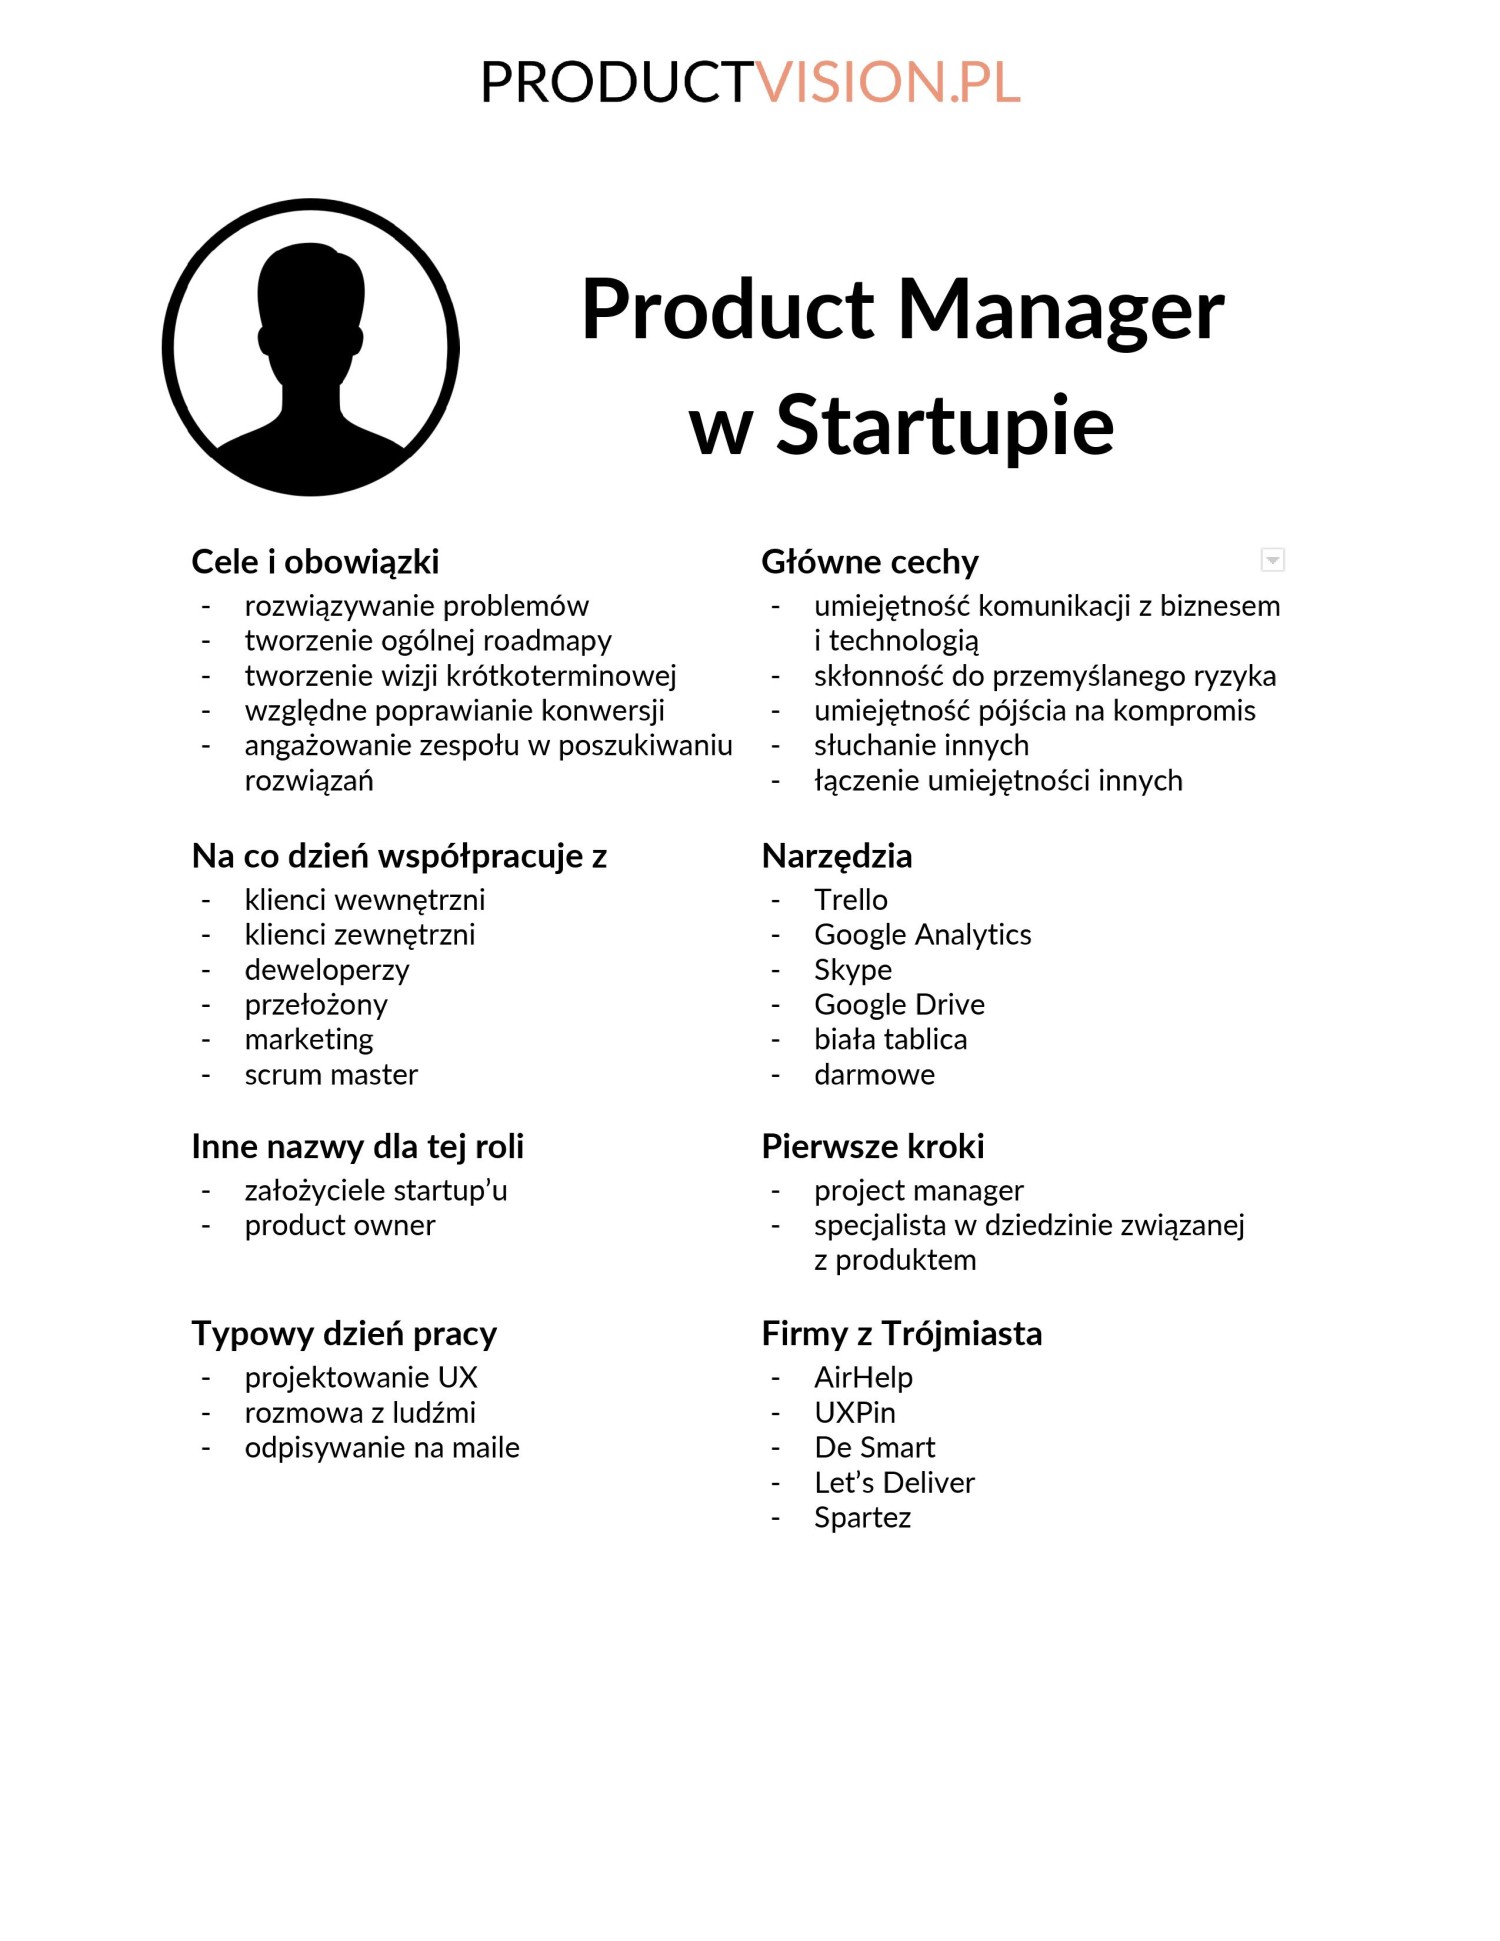 Persona - Product Manager w Startupie